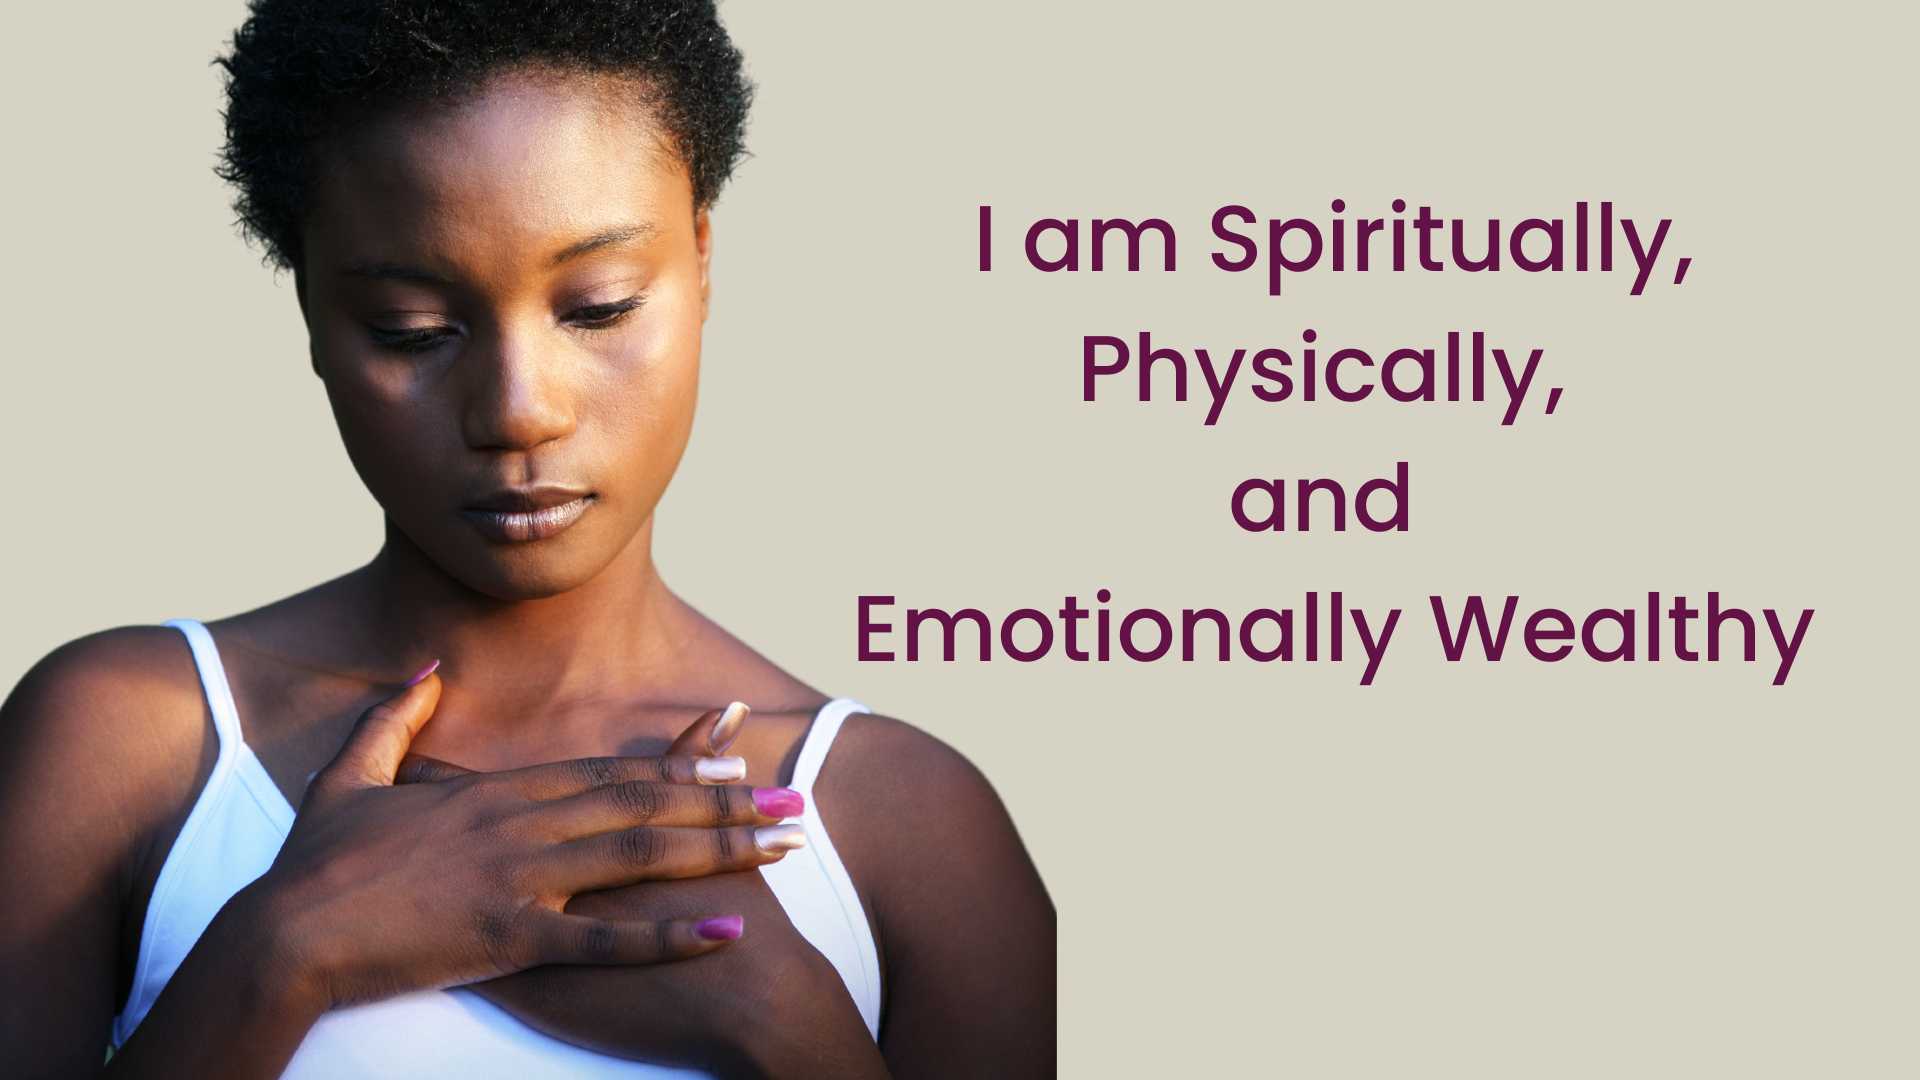 I am spiritually, physically, and emotionally wealthy – Affirmations